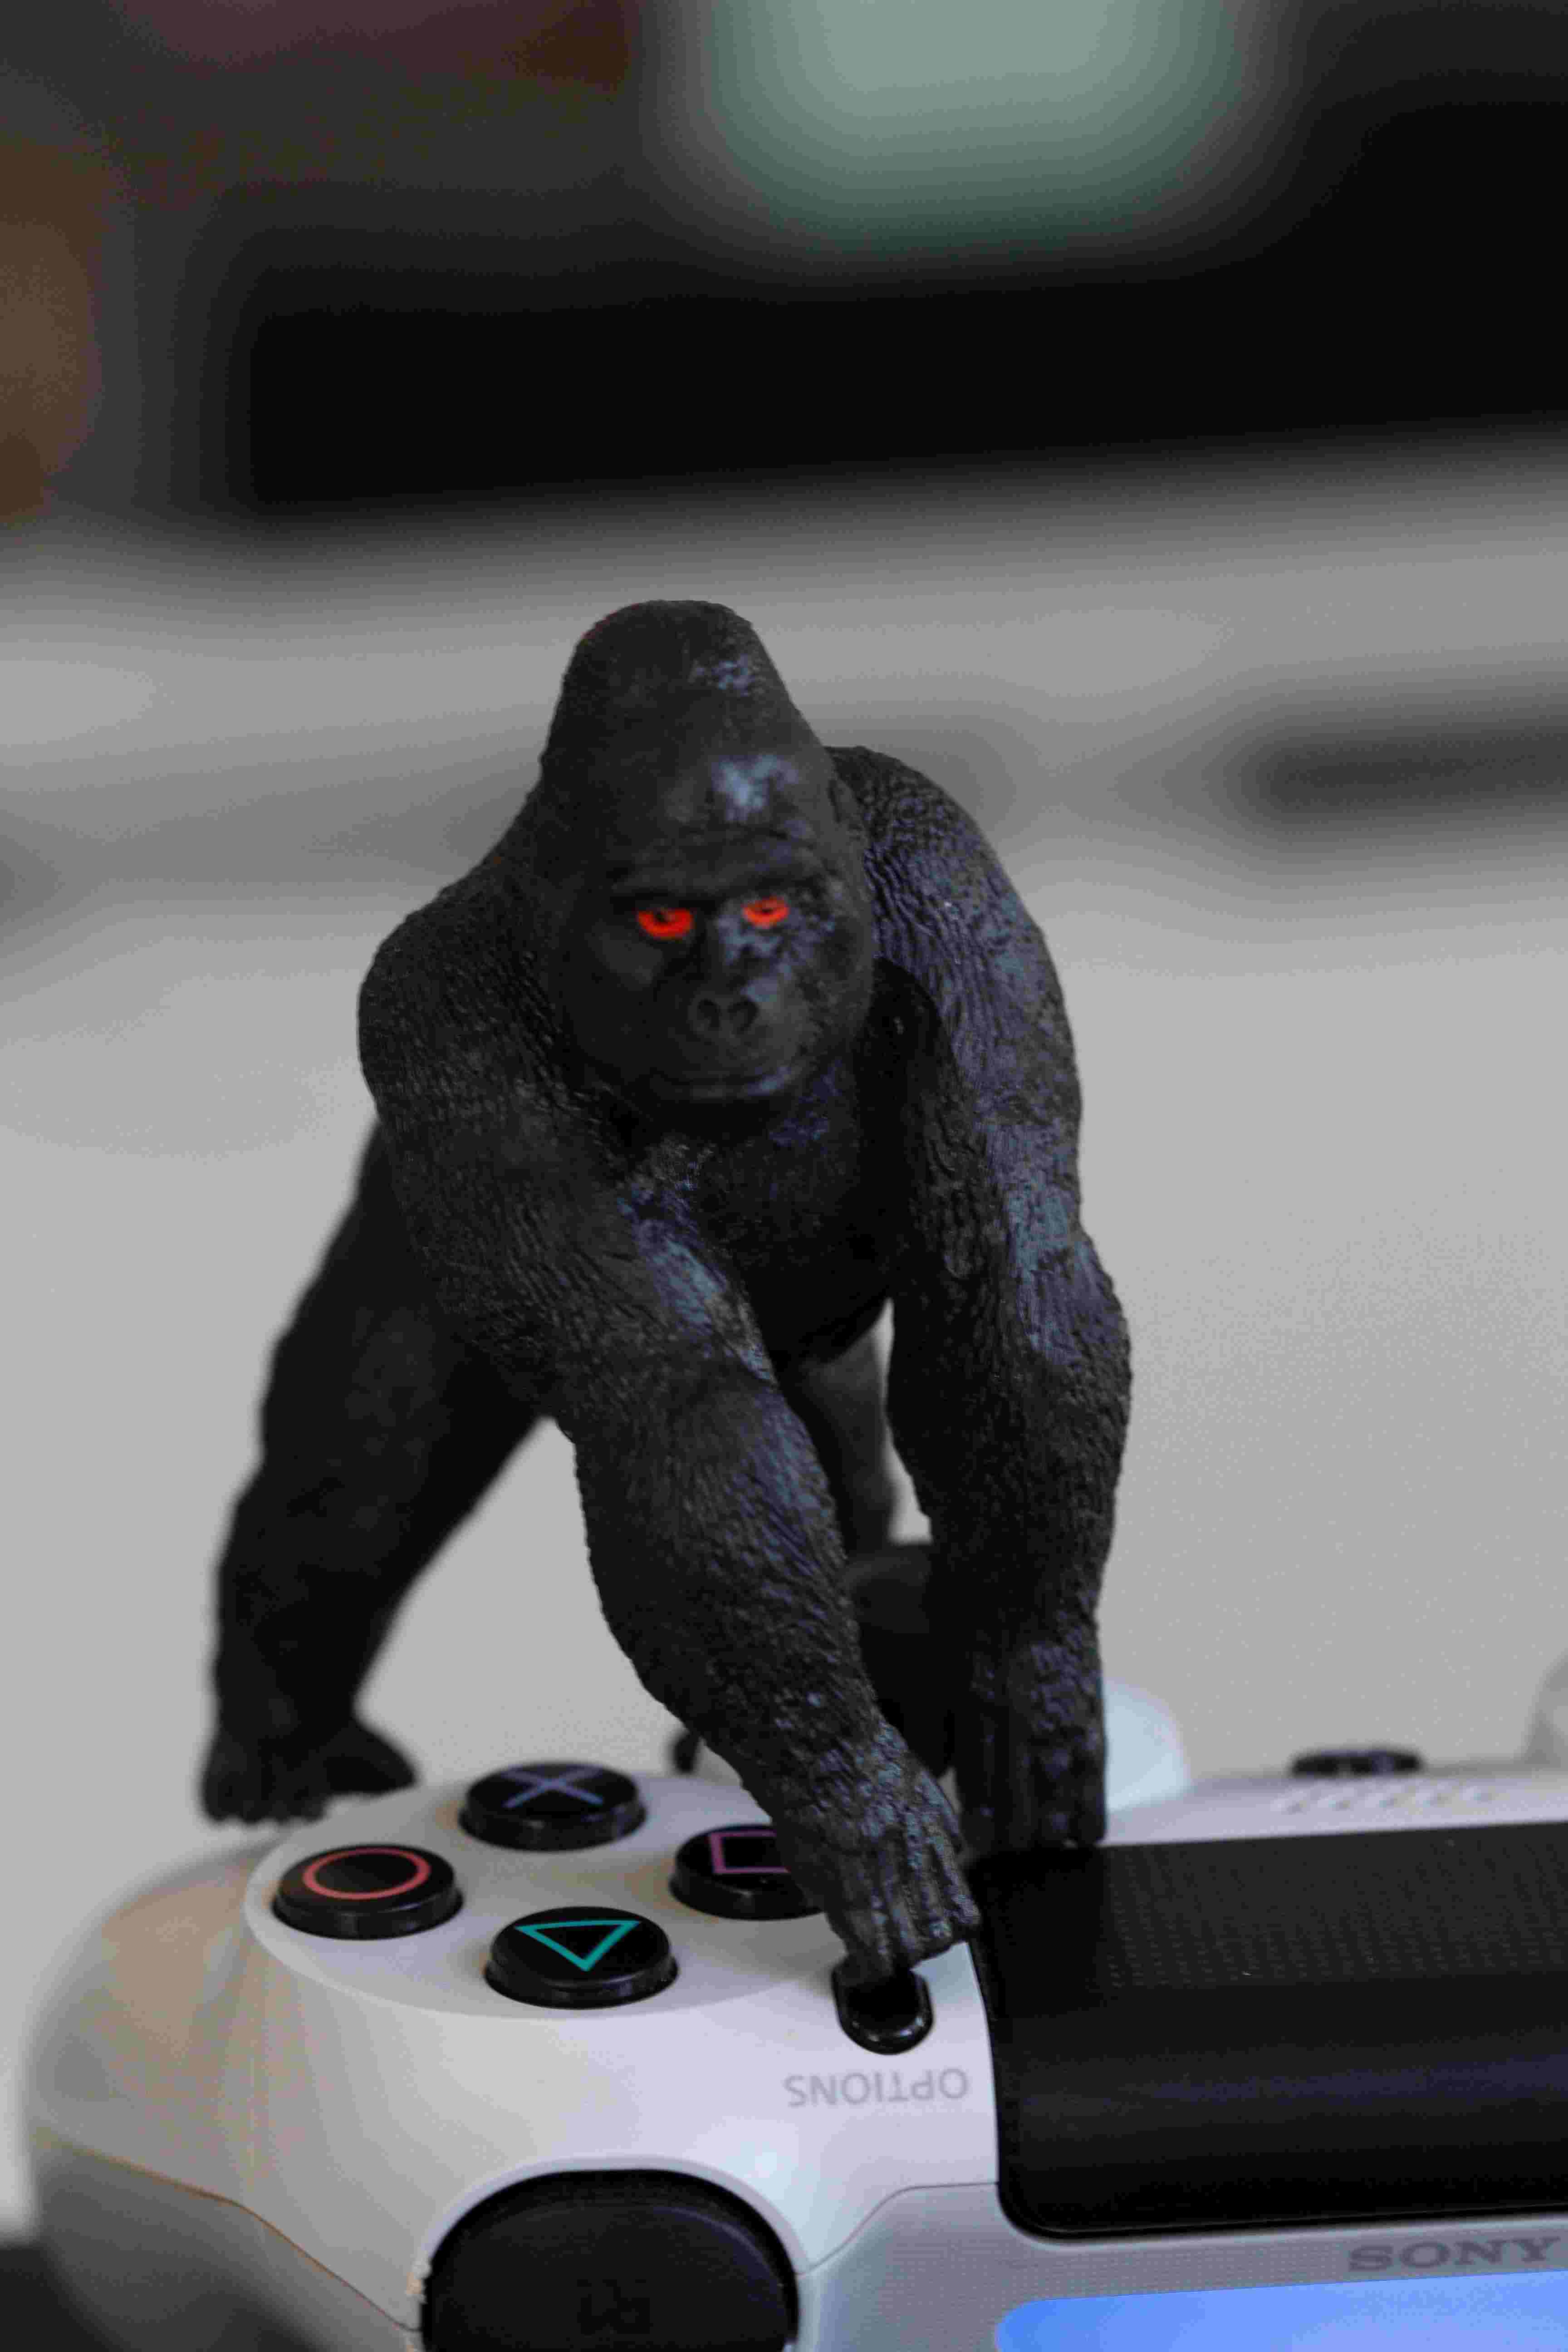 Toy ape on a video game console